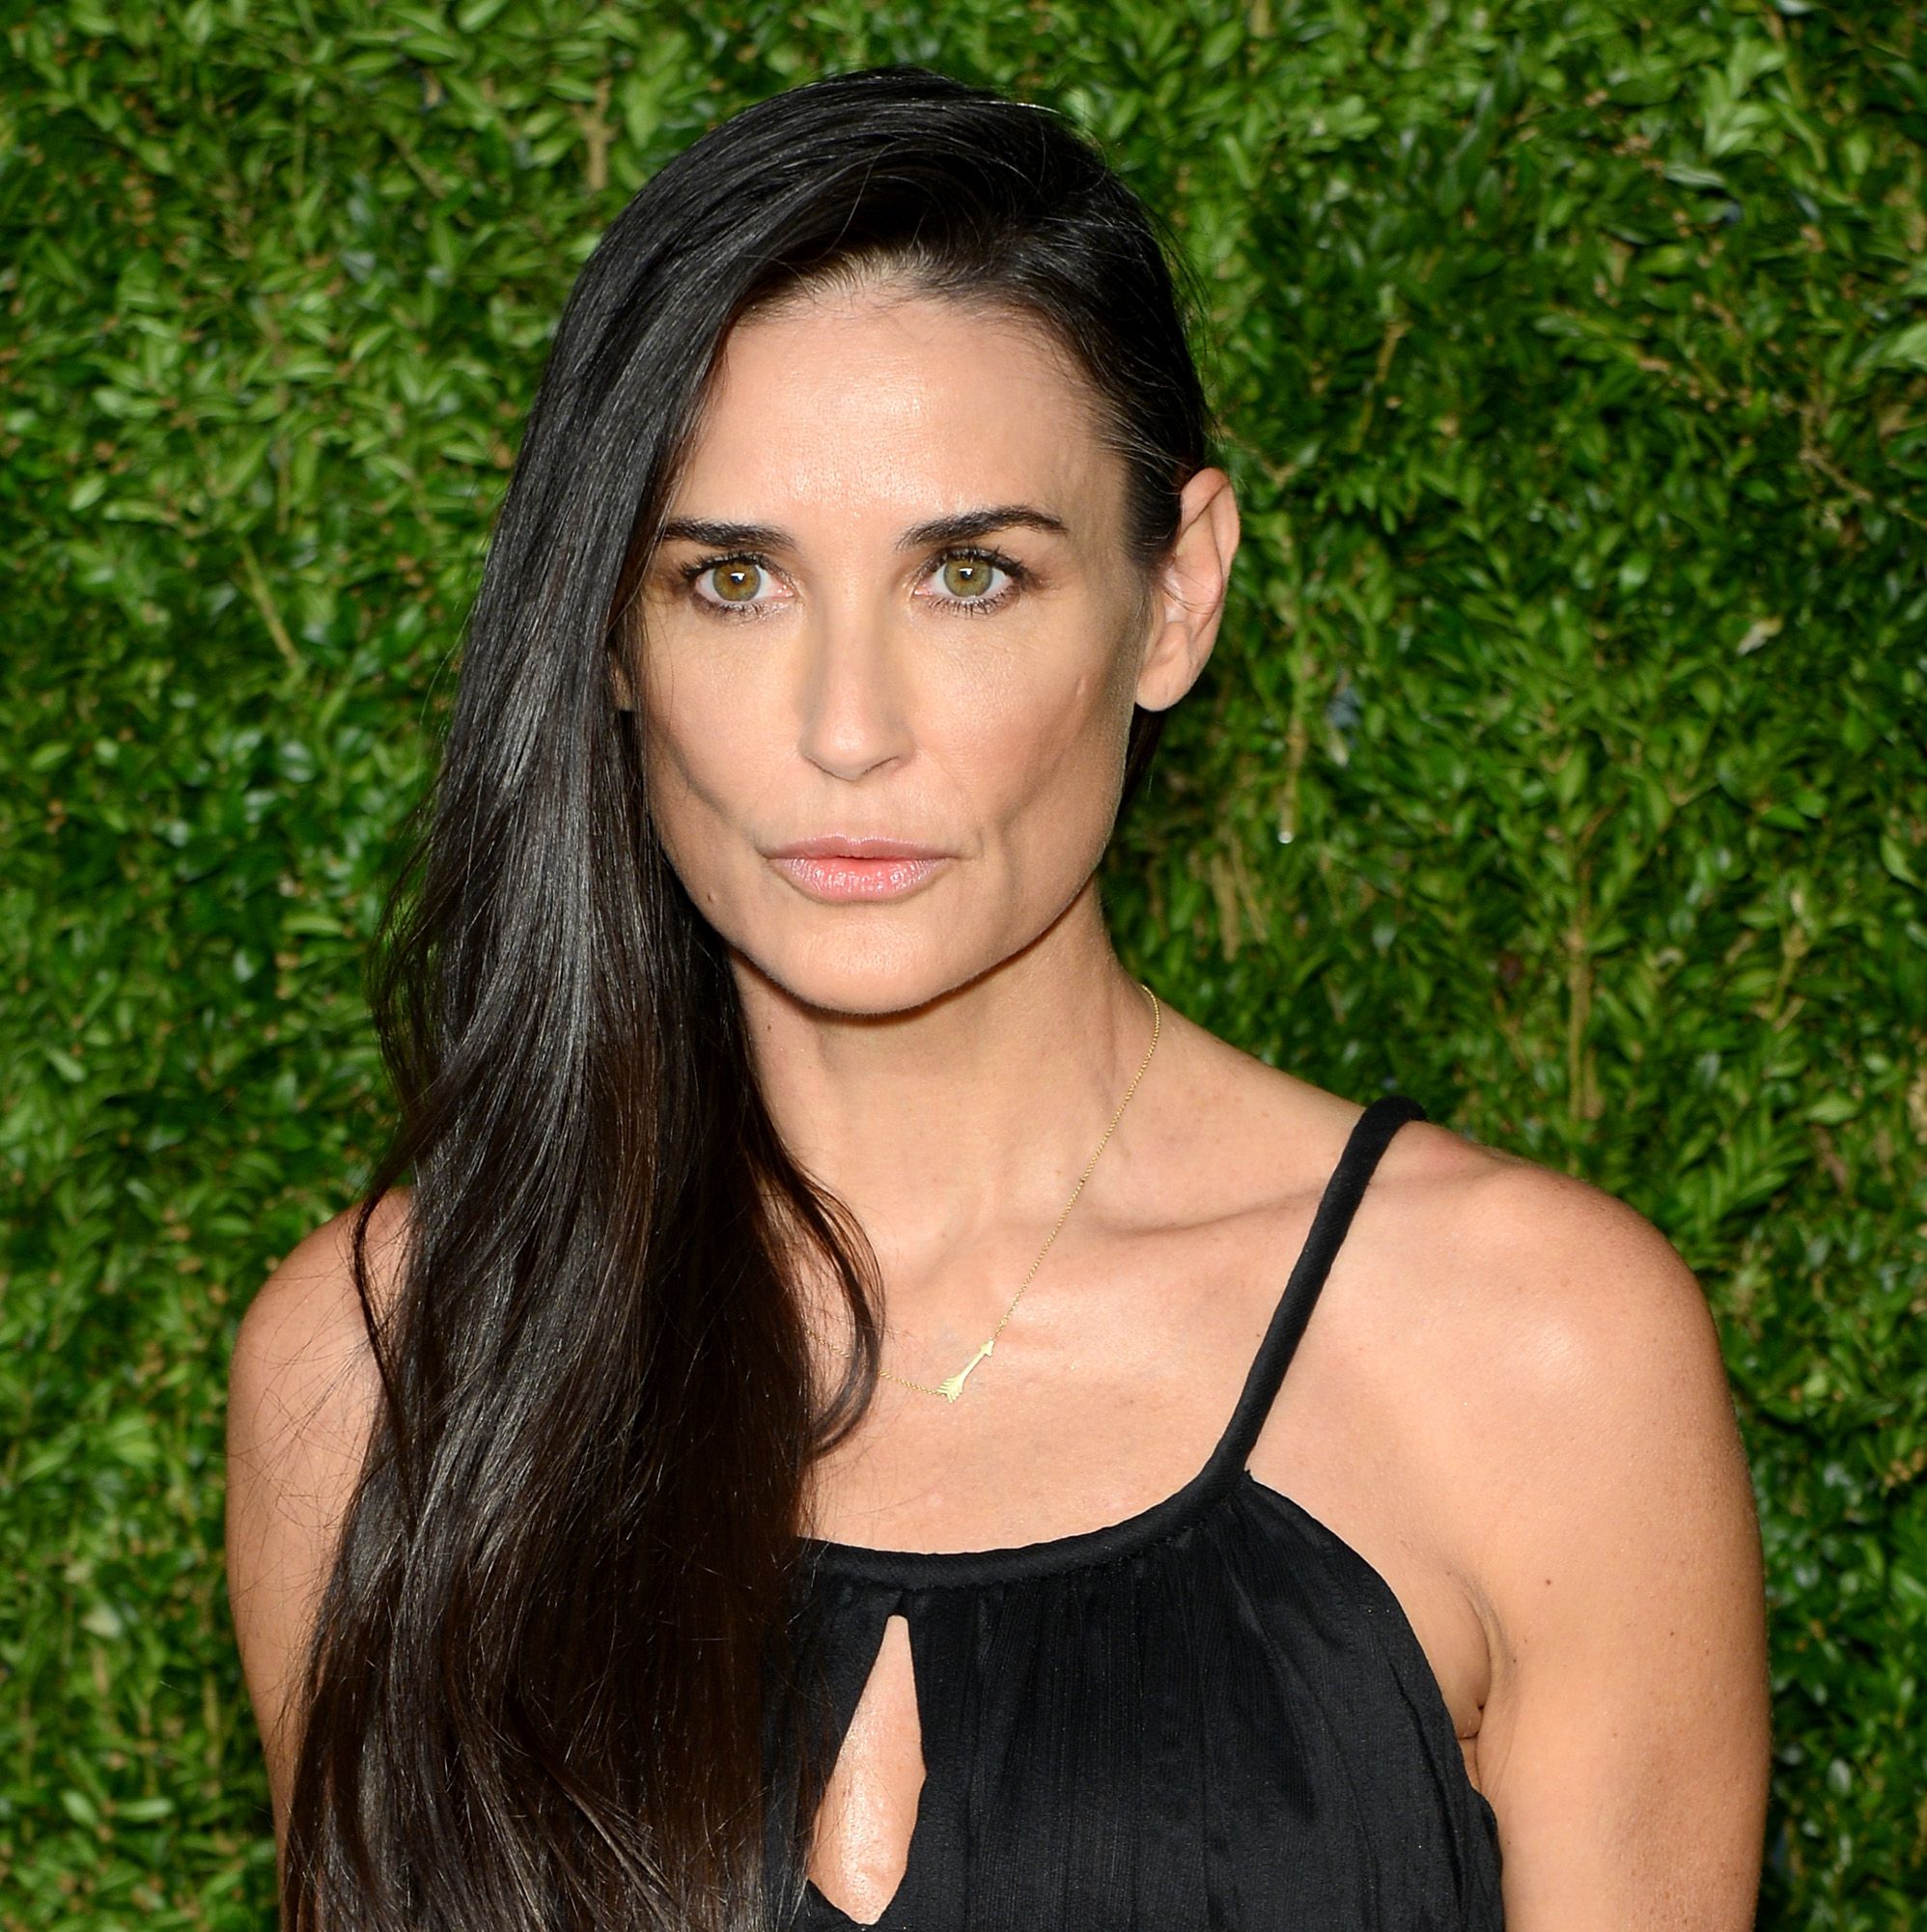 Demi Moore at the 12th Annual CFDA/Vogue Fashion Fund Awards - Arrivals